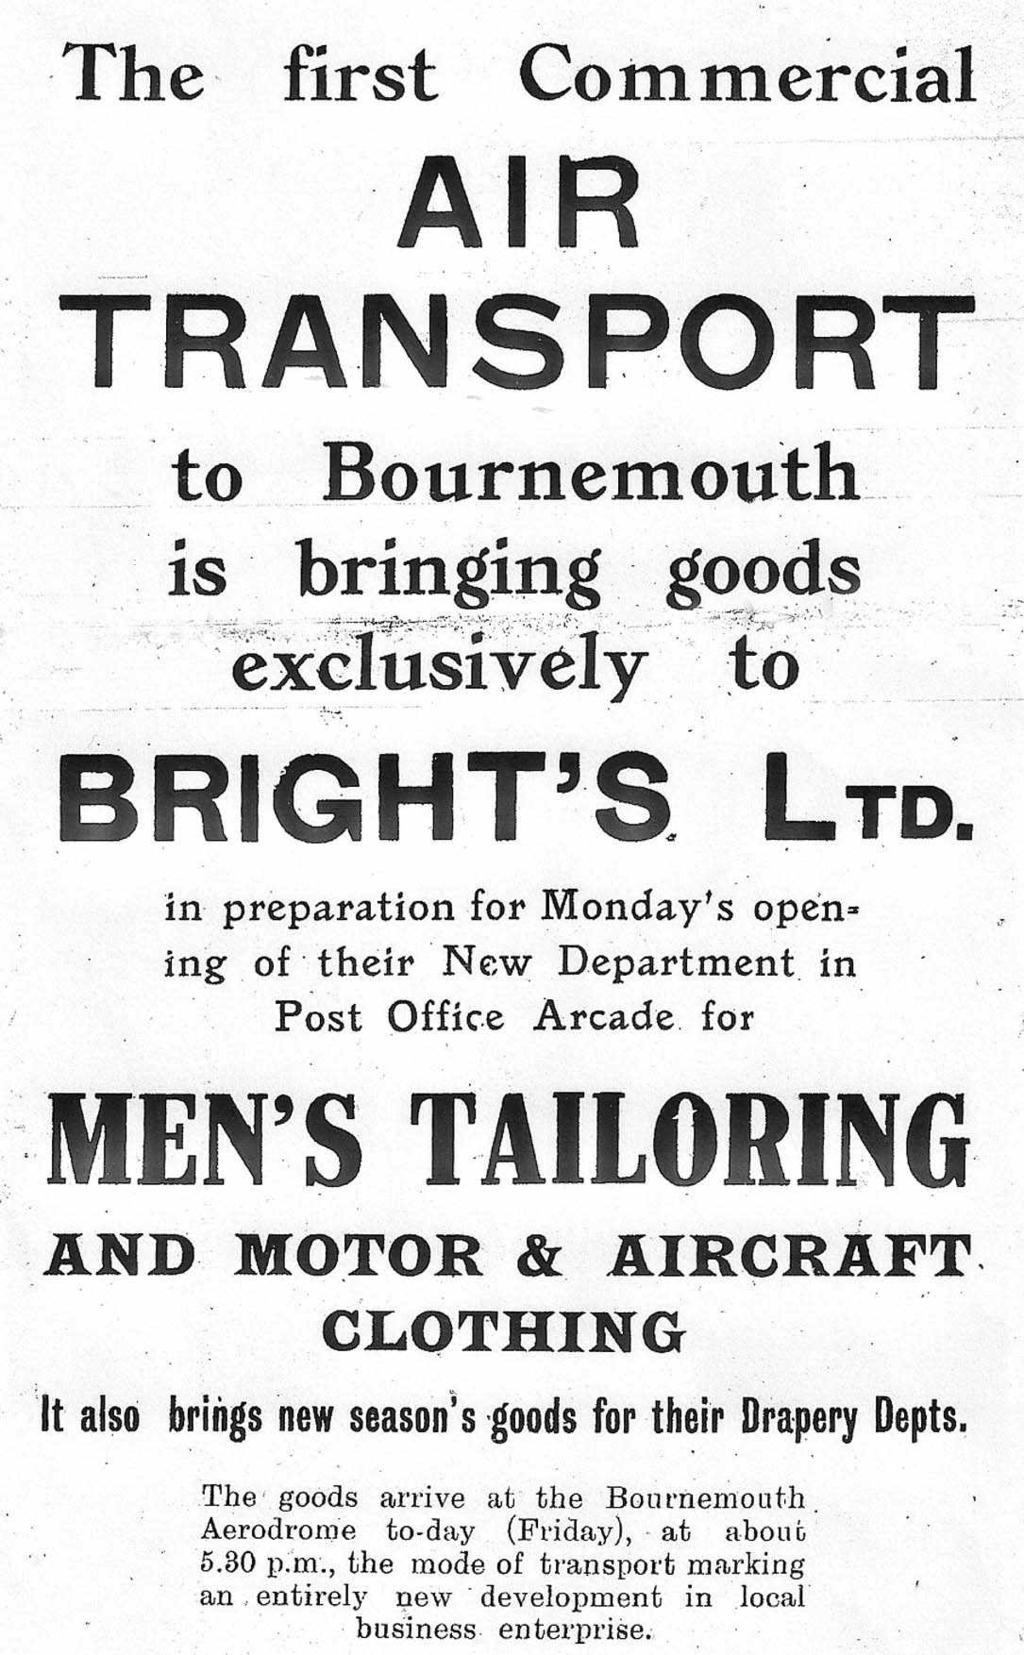 Further advertisements appeared heralding "Joy Rides in Handley-Page Bombers" and Whitsun Flying in Bournemouth" and on 18th July